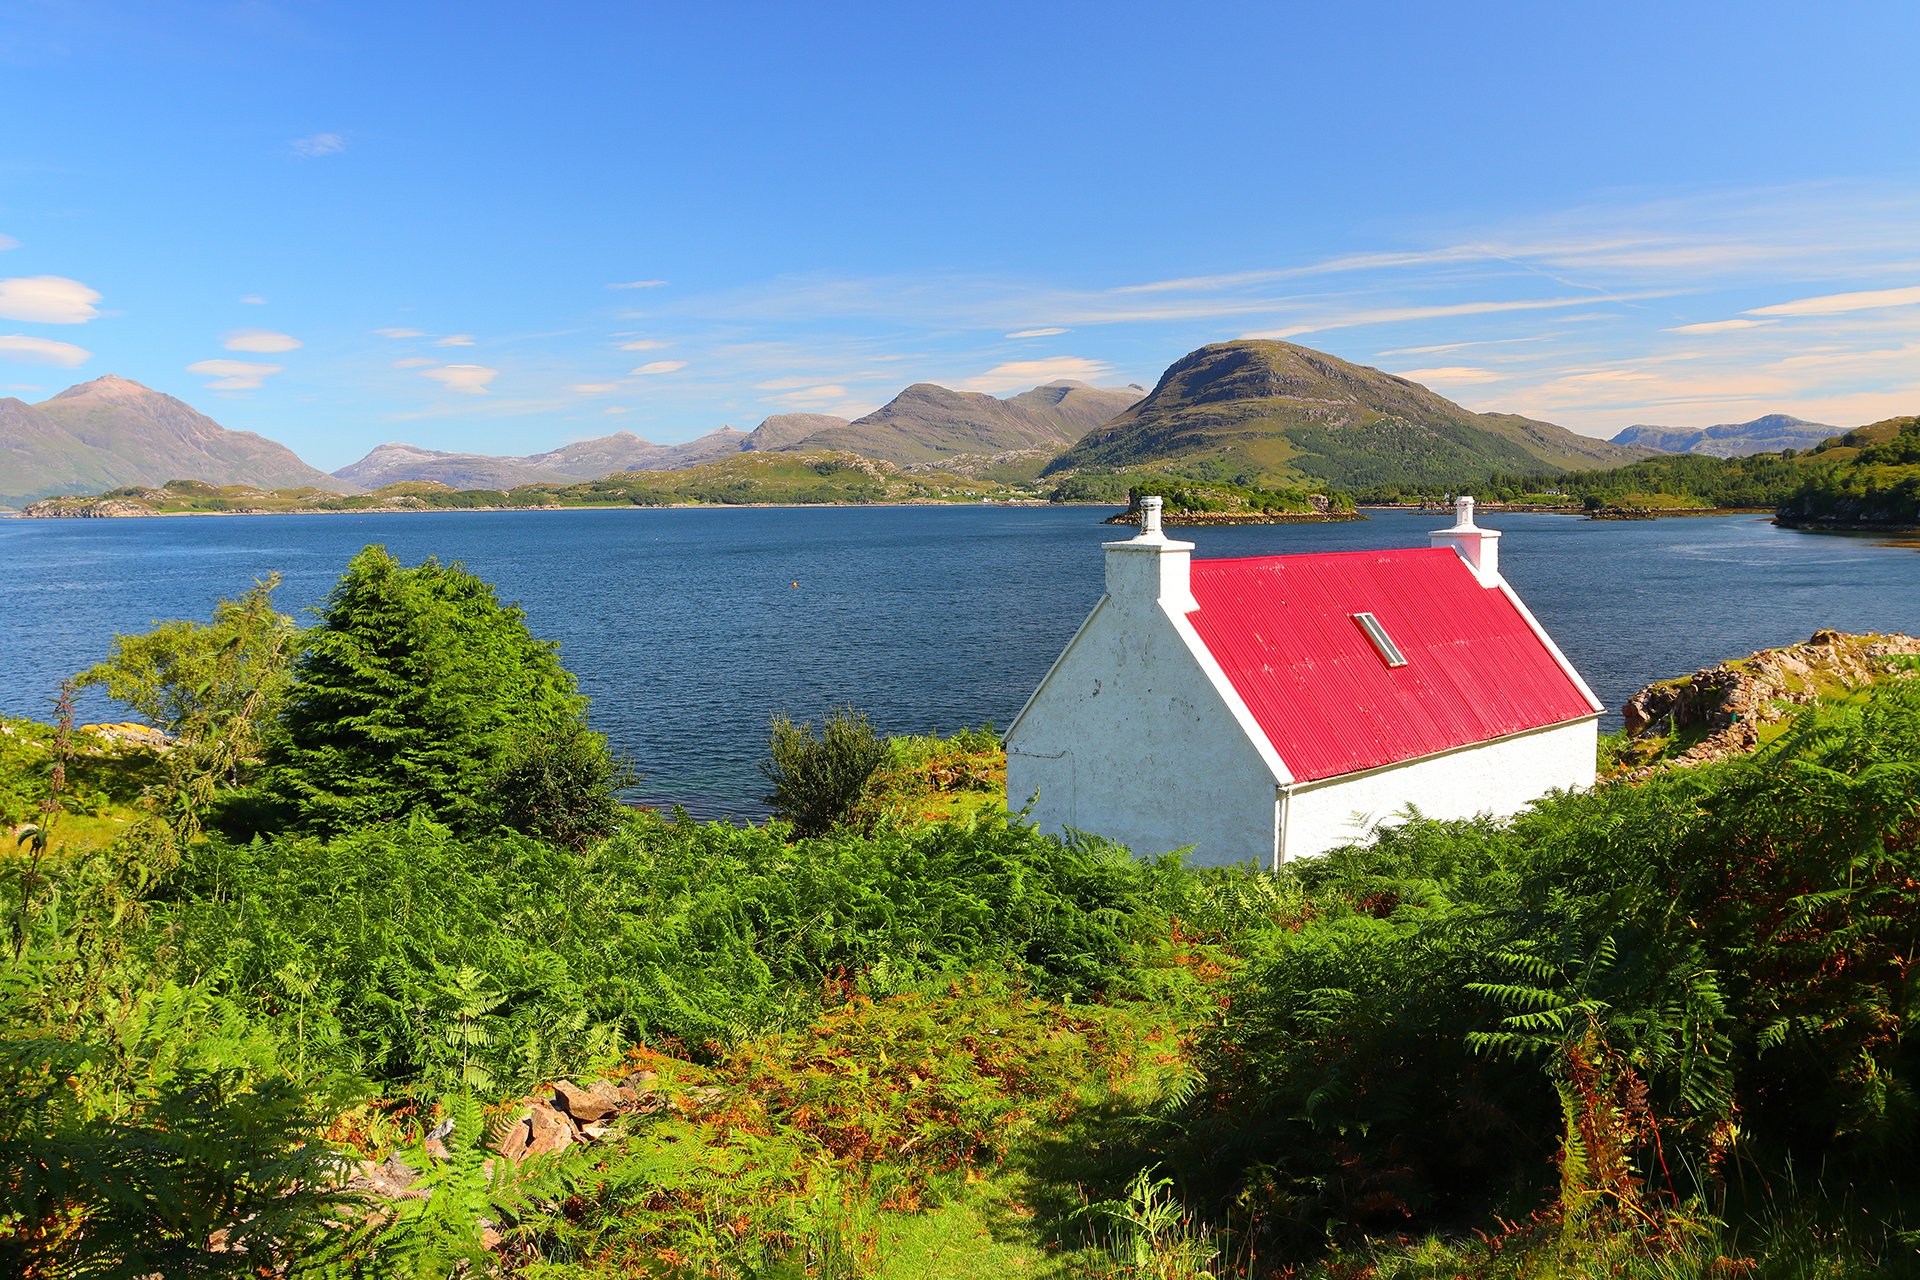 Cottage with view of Loch Sheildaig and Torridan hills.